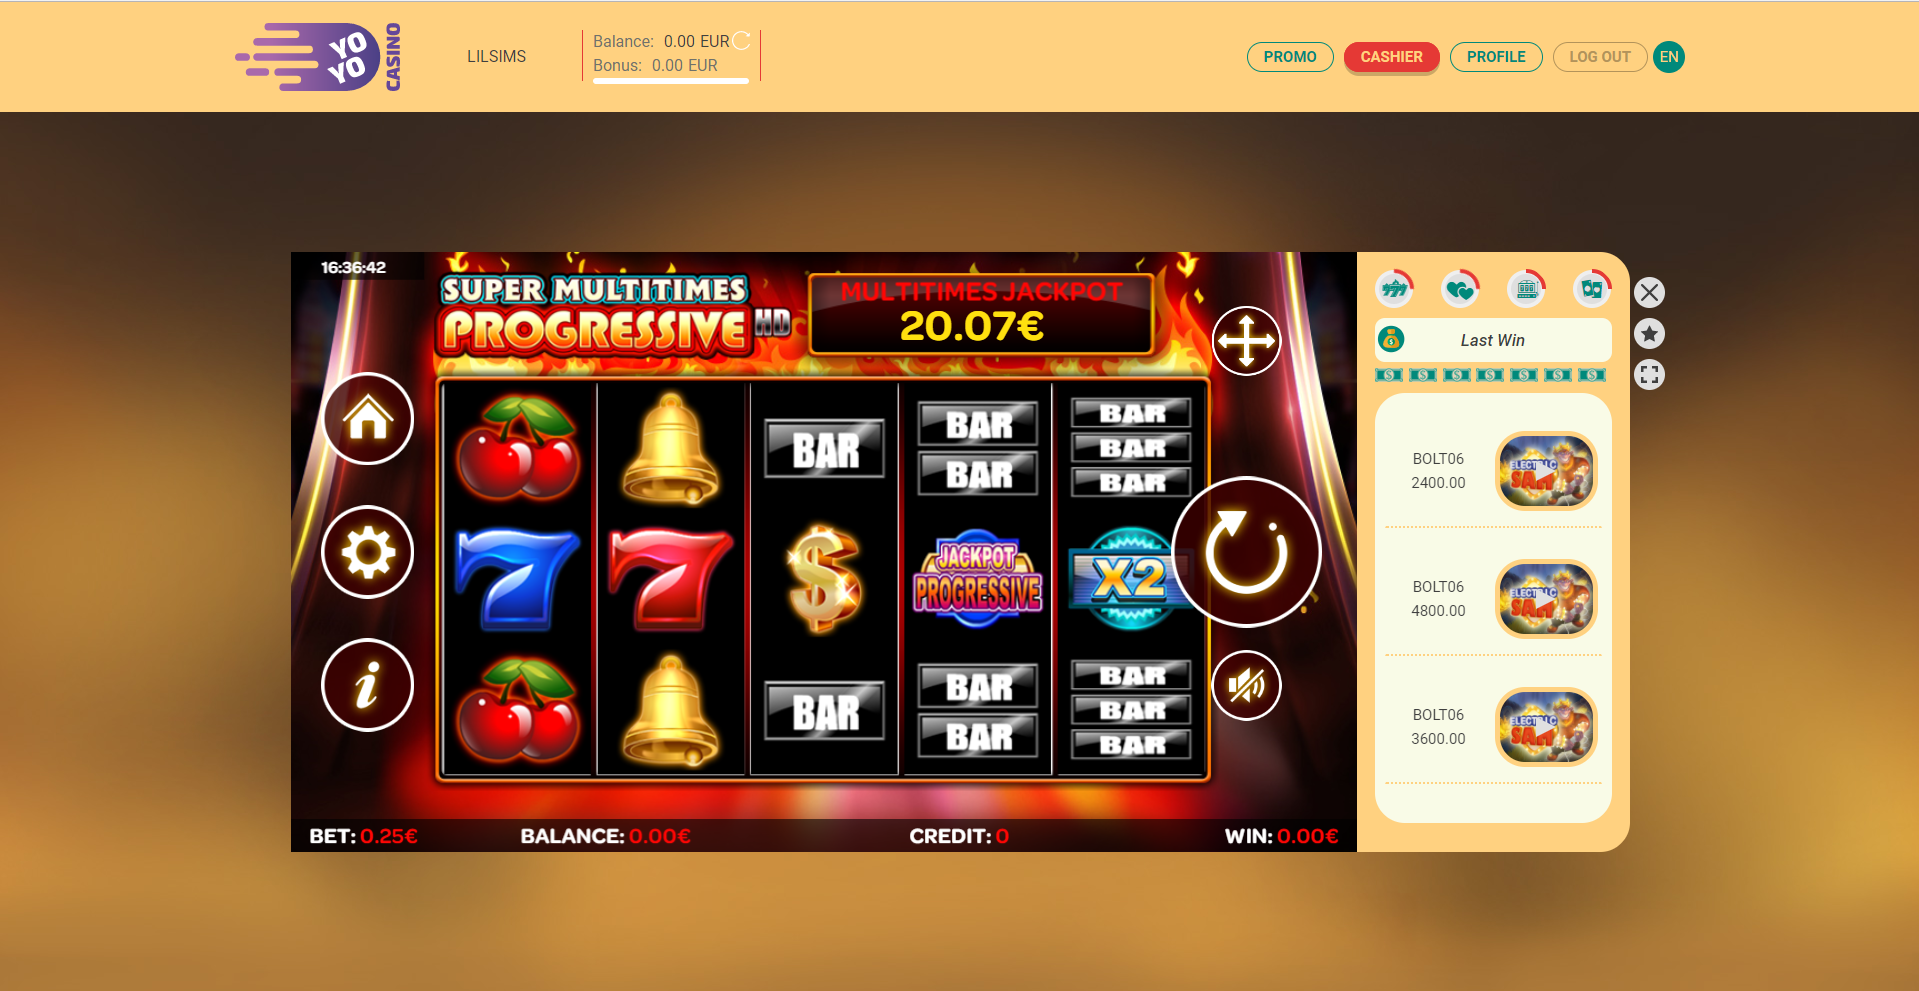 Casino Lab Casino Review 2022 - Spin on 1,450+ Slots